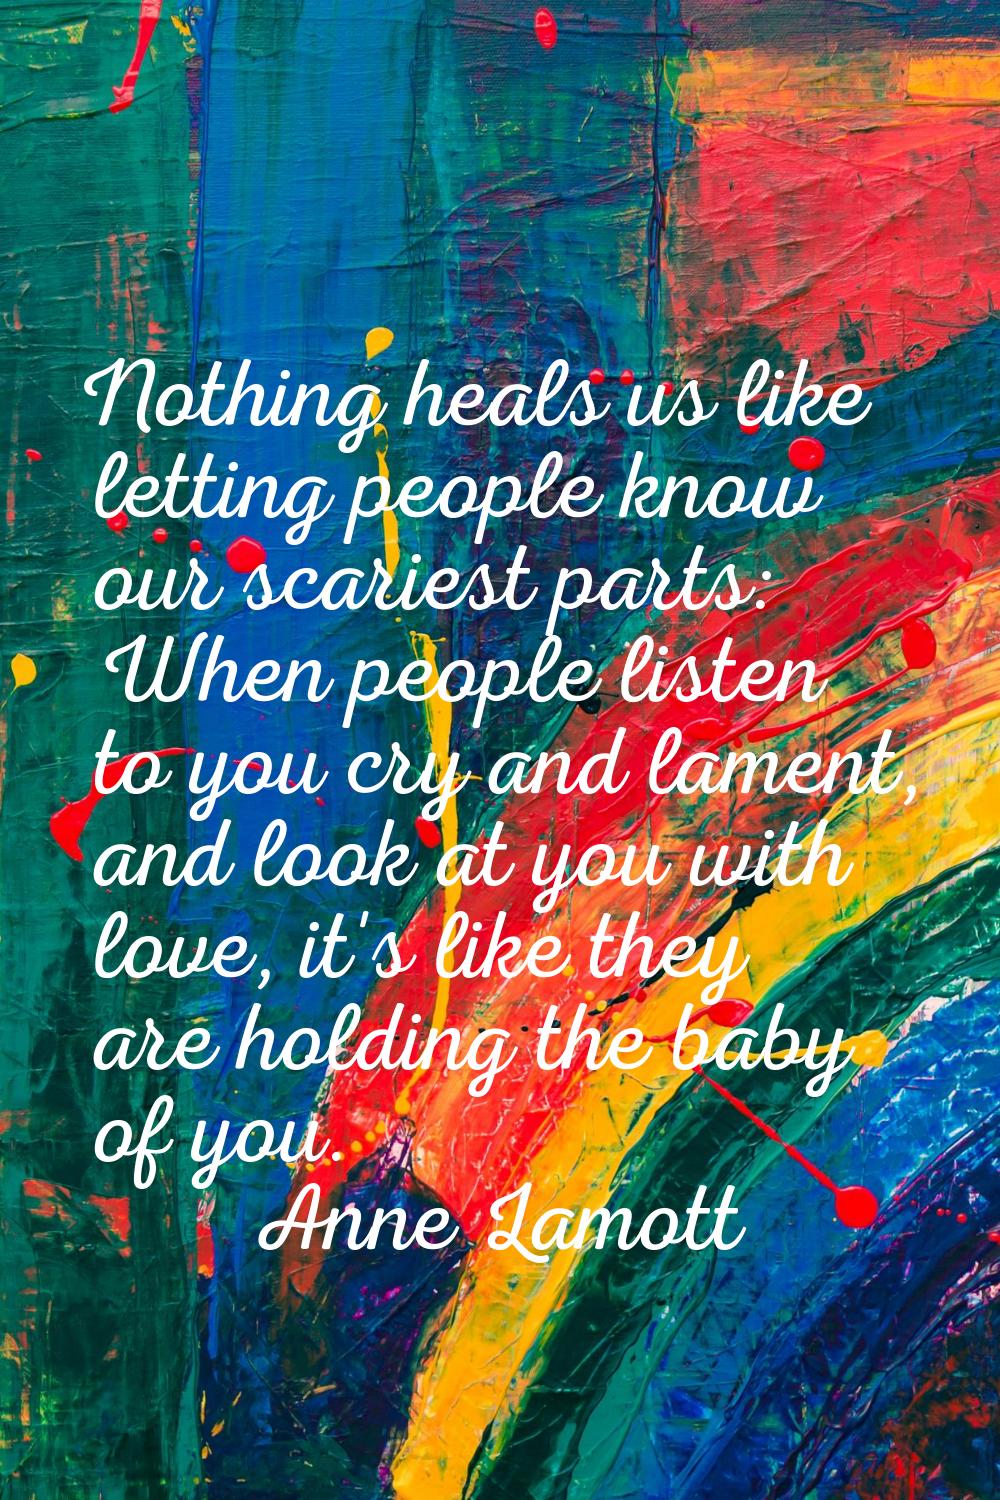 Nothing heals us like letting people know our scariest parts: When people listen to you cry and lam